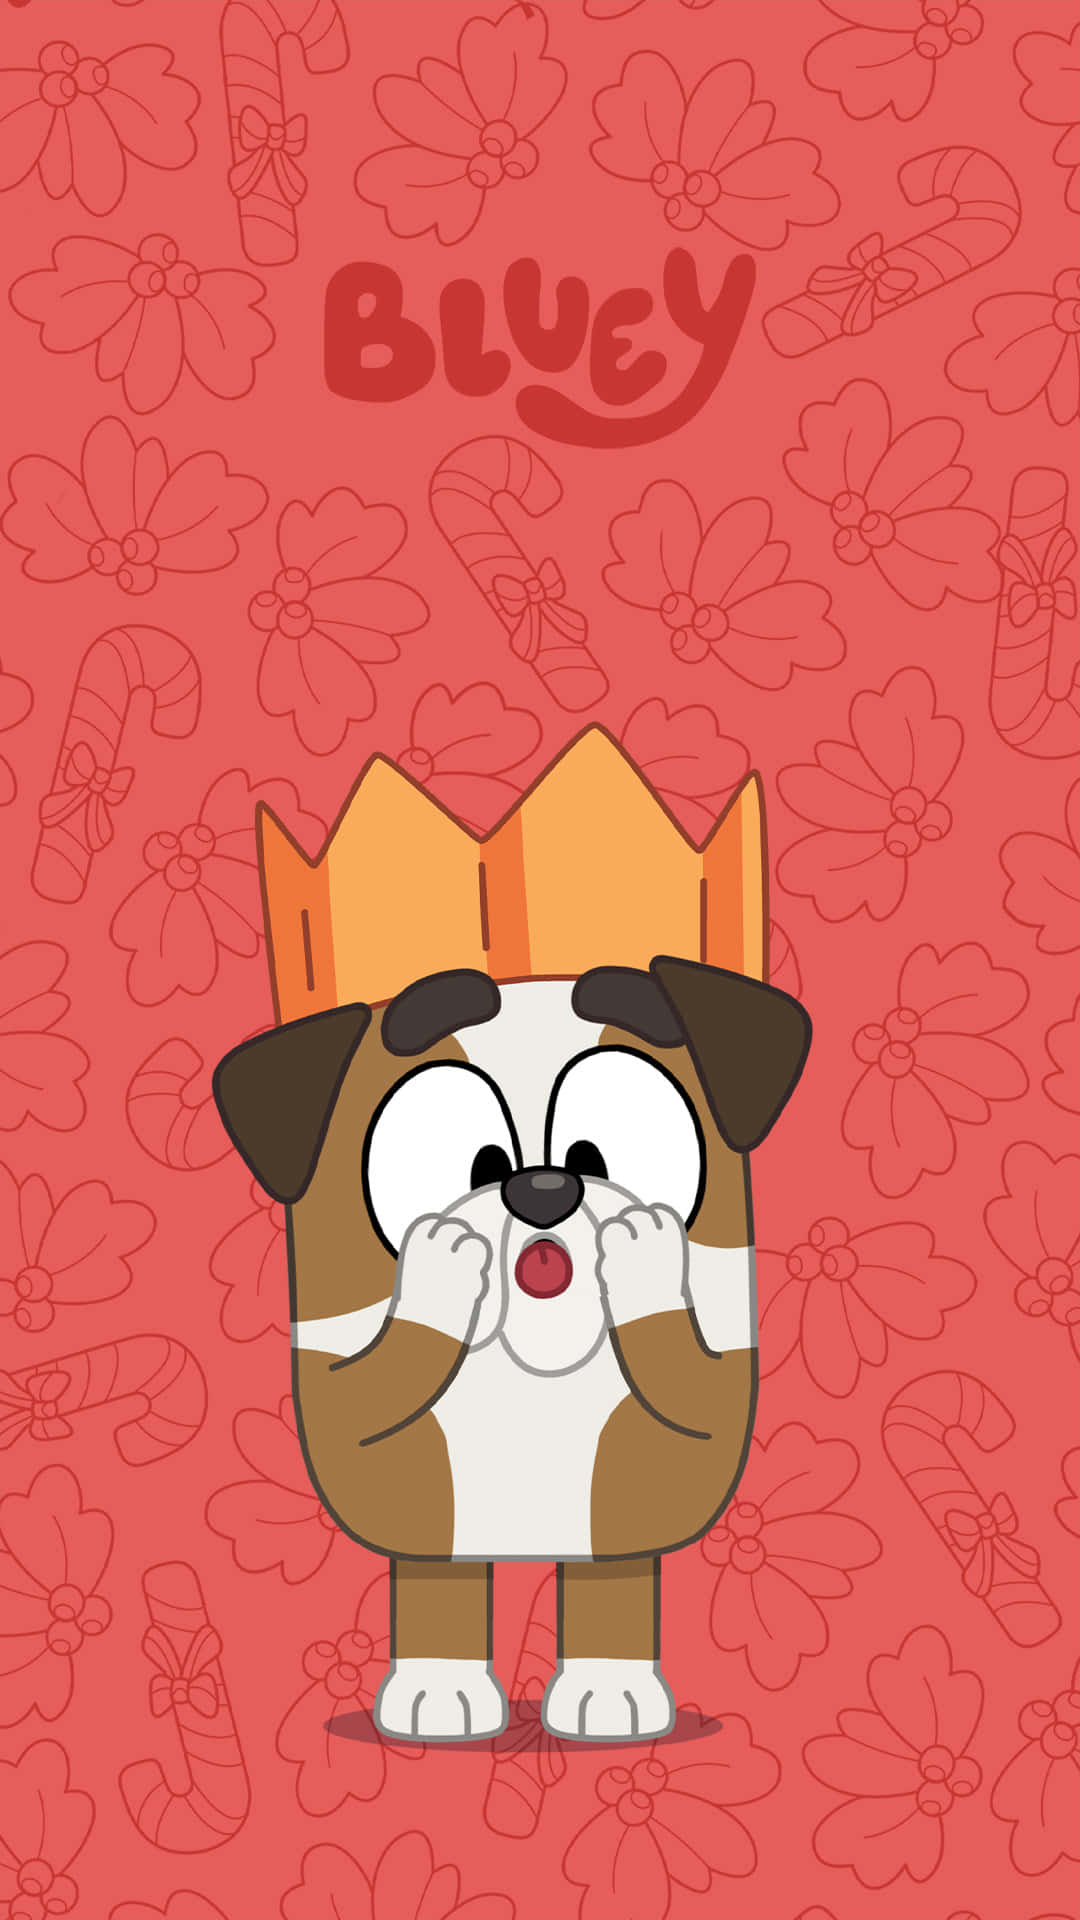 Bluey Character Wearing Paper Crown Wallpaper